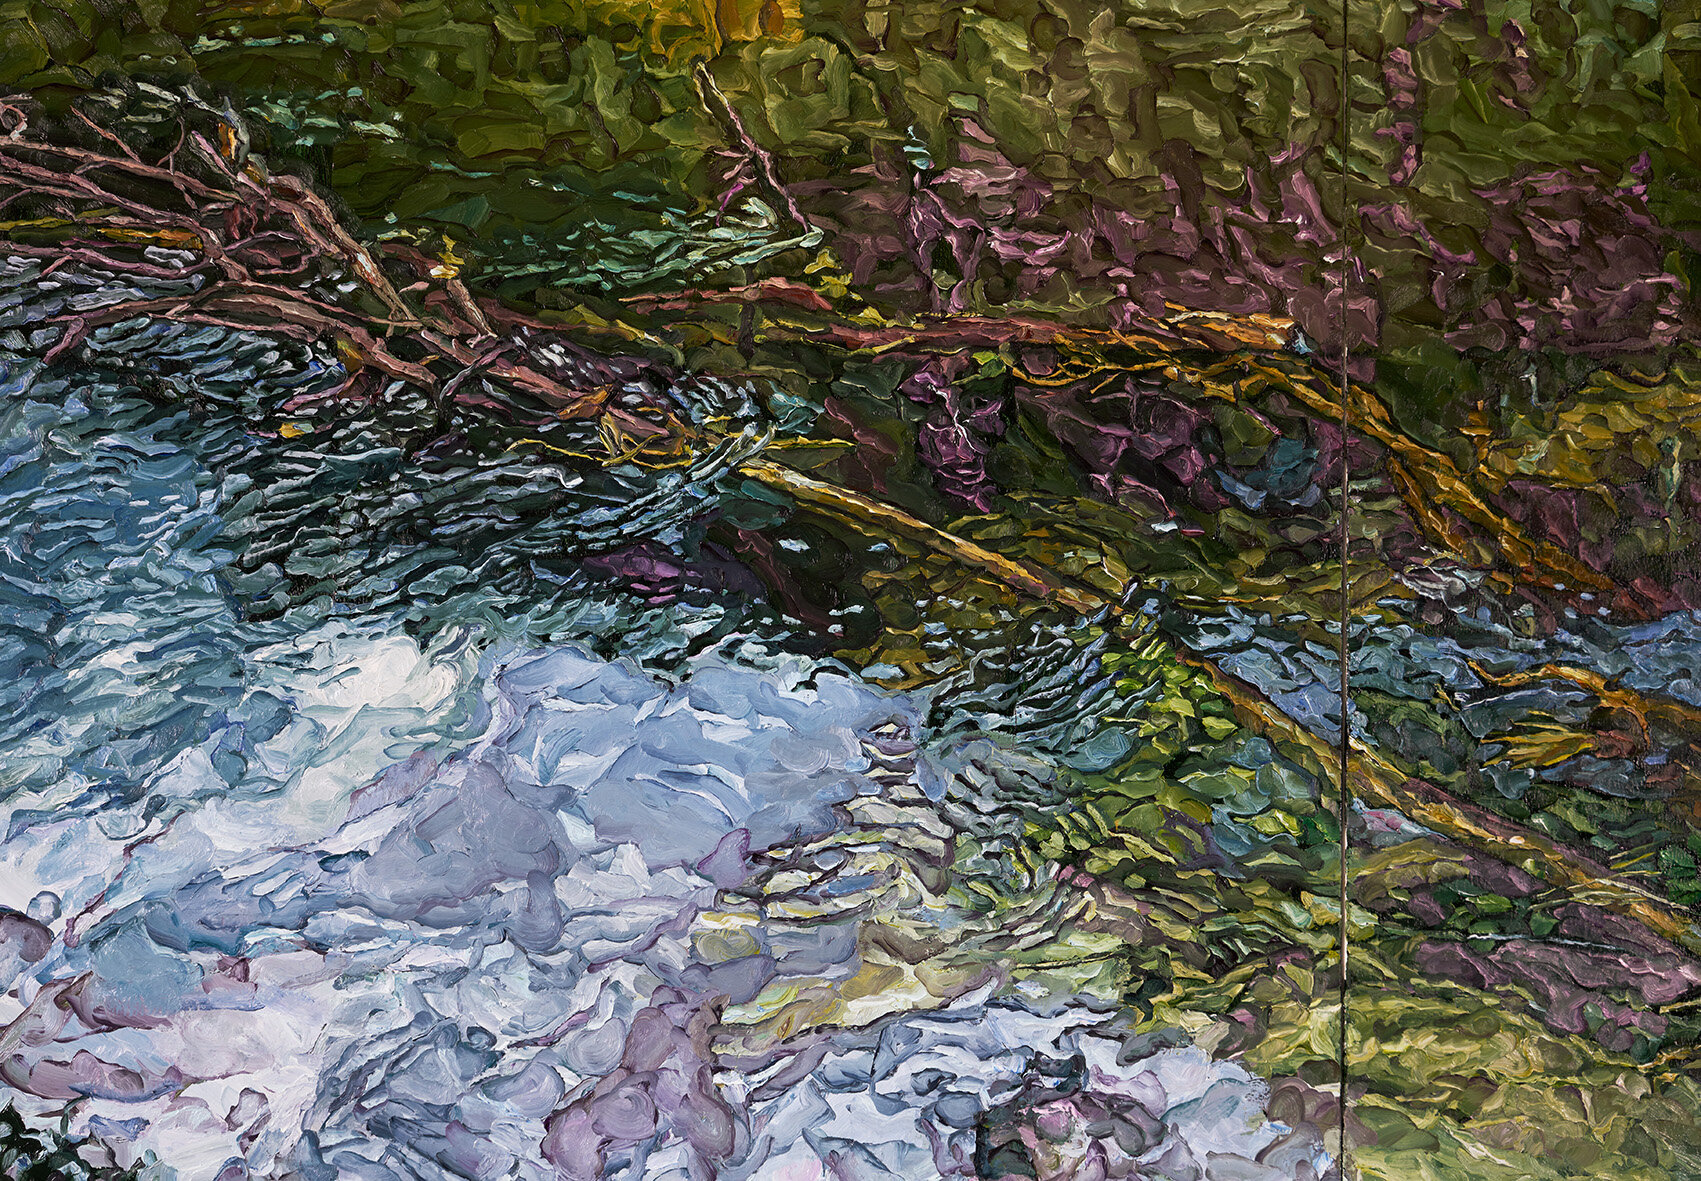  Elaine Roberto-Navas  We Cannot Step Twice Into The Same River (After Mawen Ong)  2020 Oil on canvas H182.9 x W243.8 cm (diptych, detail) 